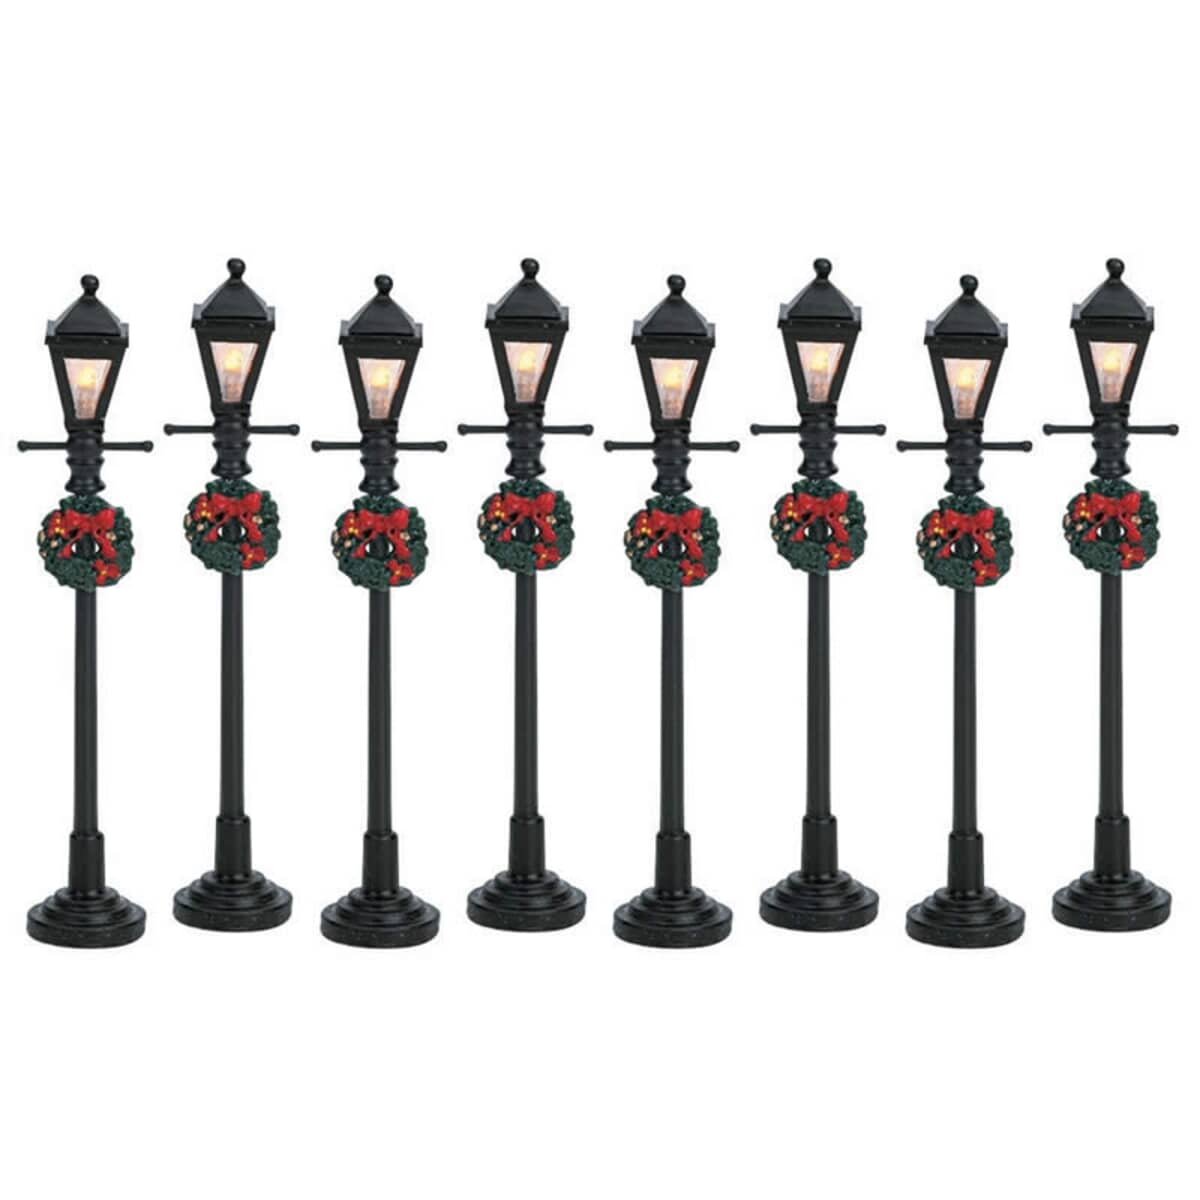 Lemax Gas Lantern Street Lamp Set Of 8 Battery Operated (4.5V) (64500) £7.2 from Lemax